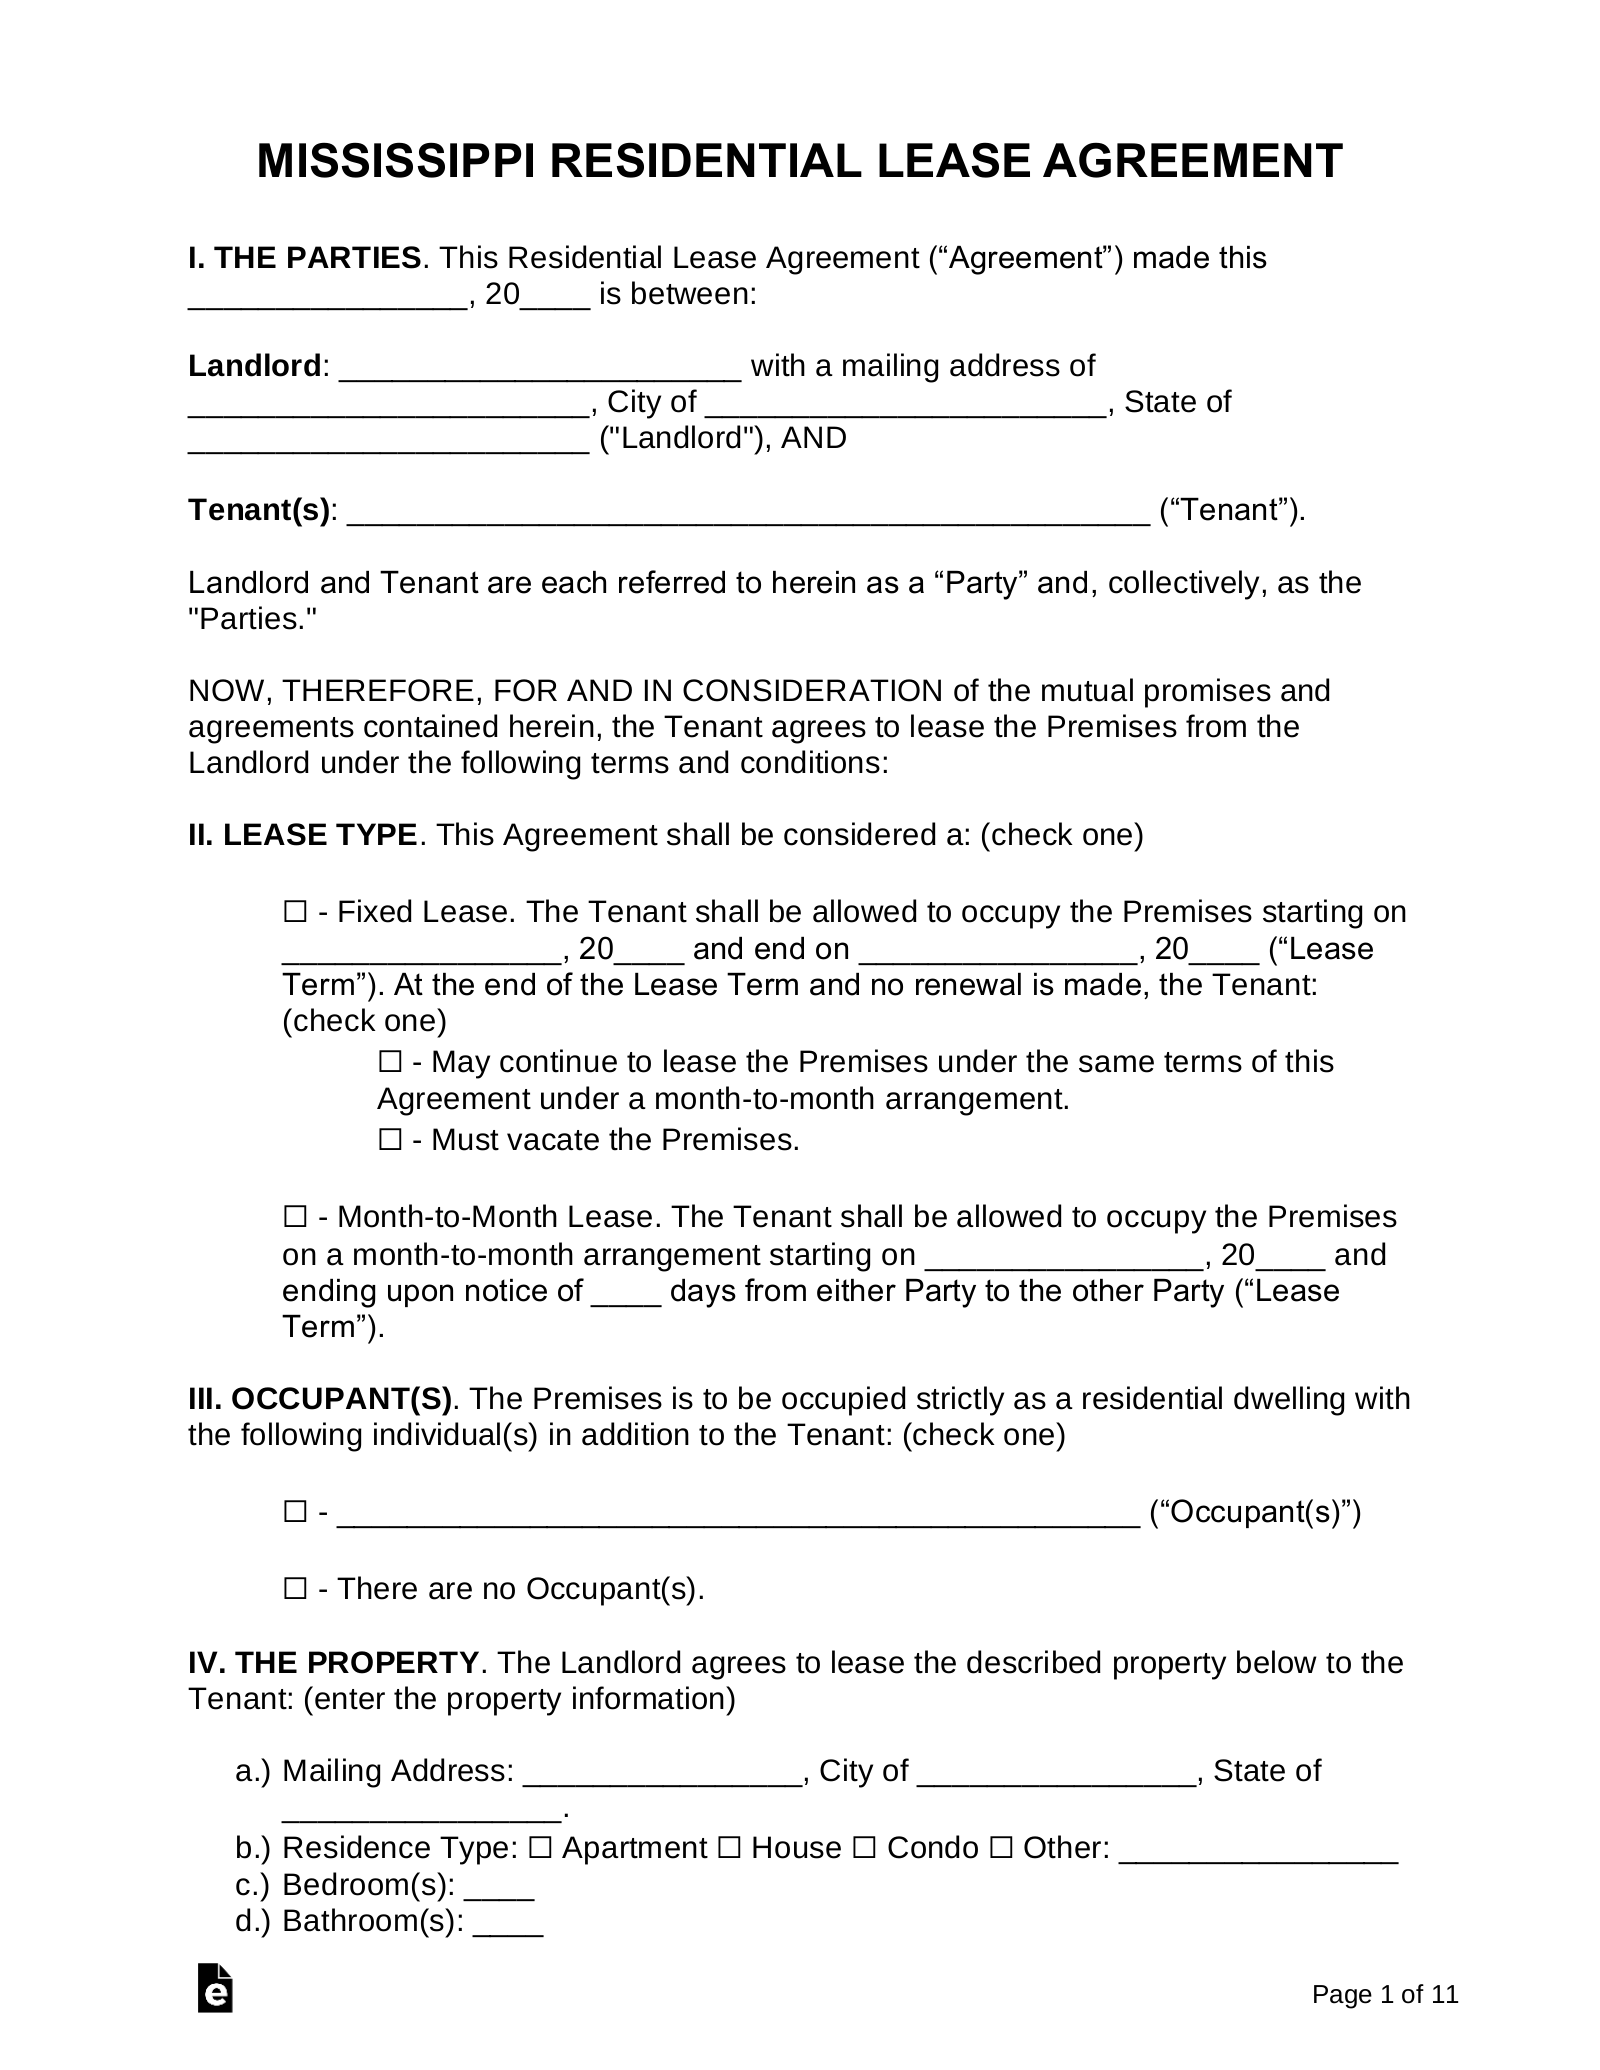 Mississippi Lease Agreement Templates (7)